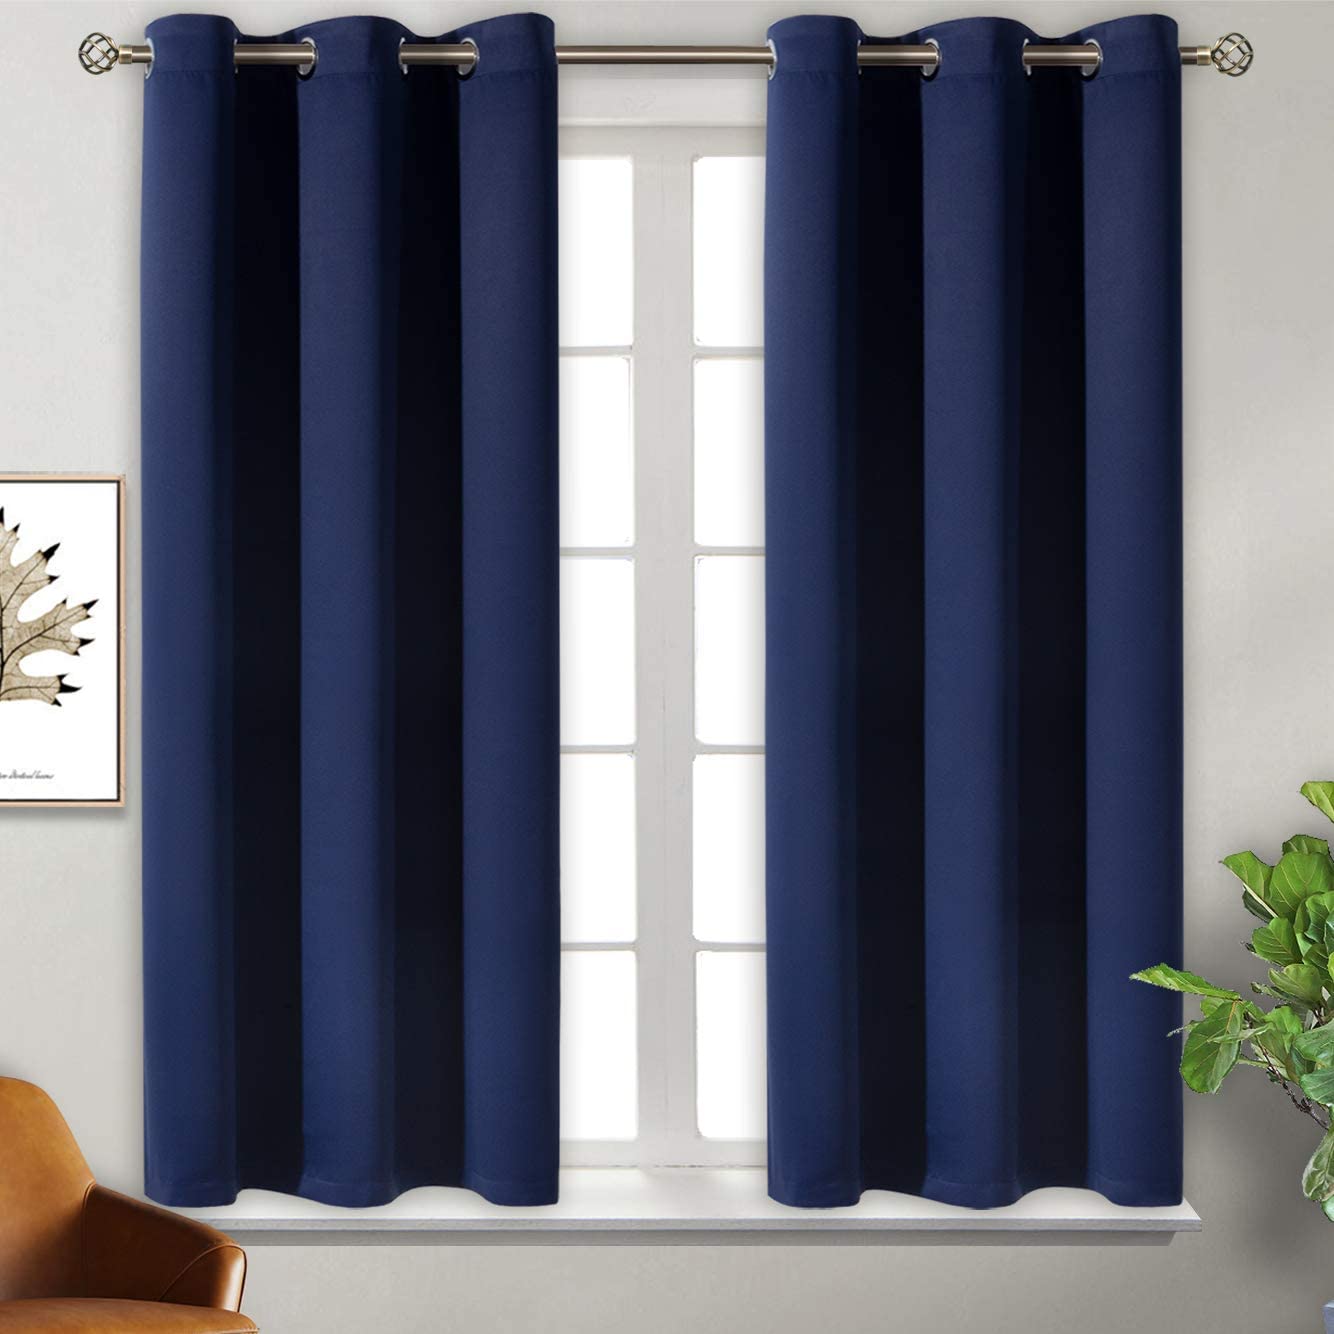 BGment Blackout Curtains Grommet Room Darkening Curtains ,2 panels from $11.19